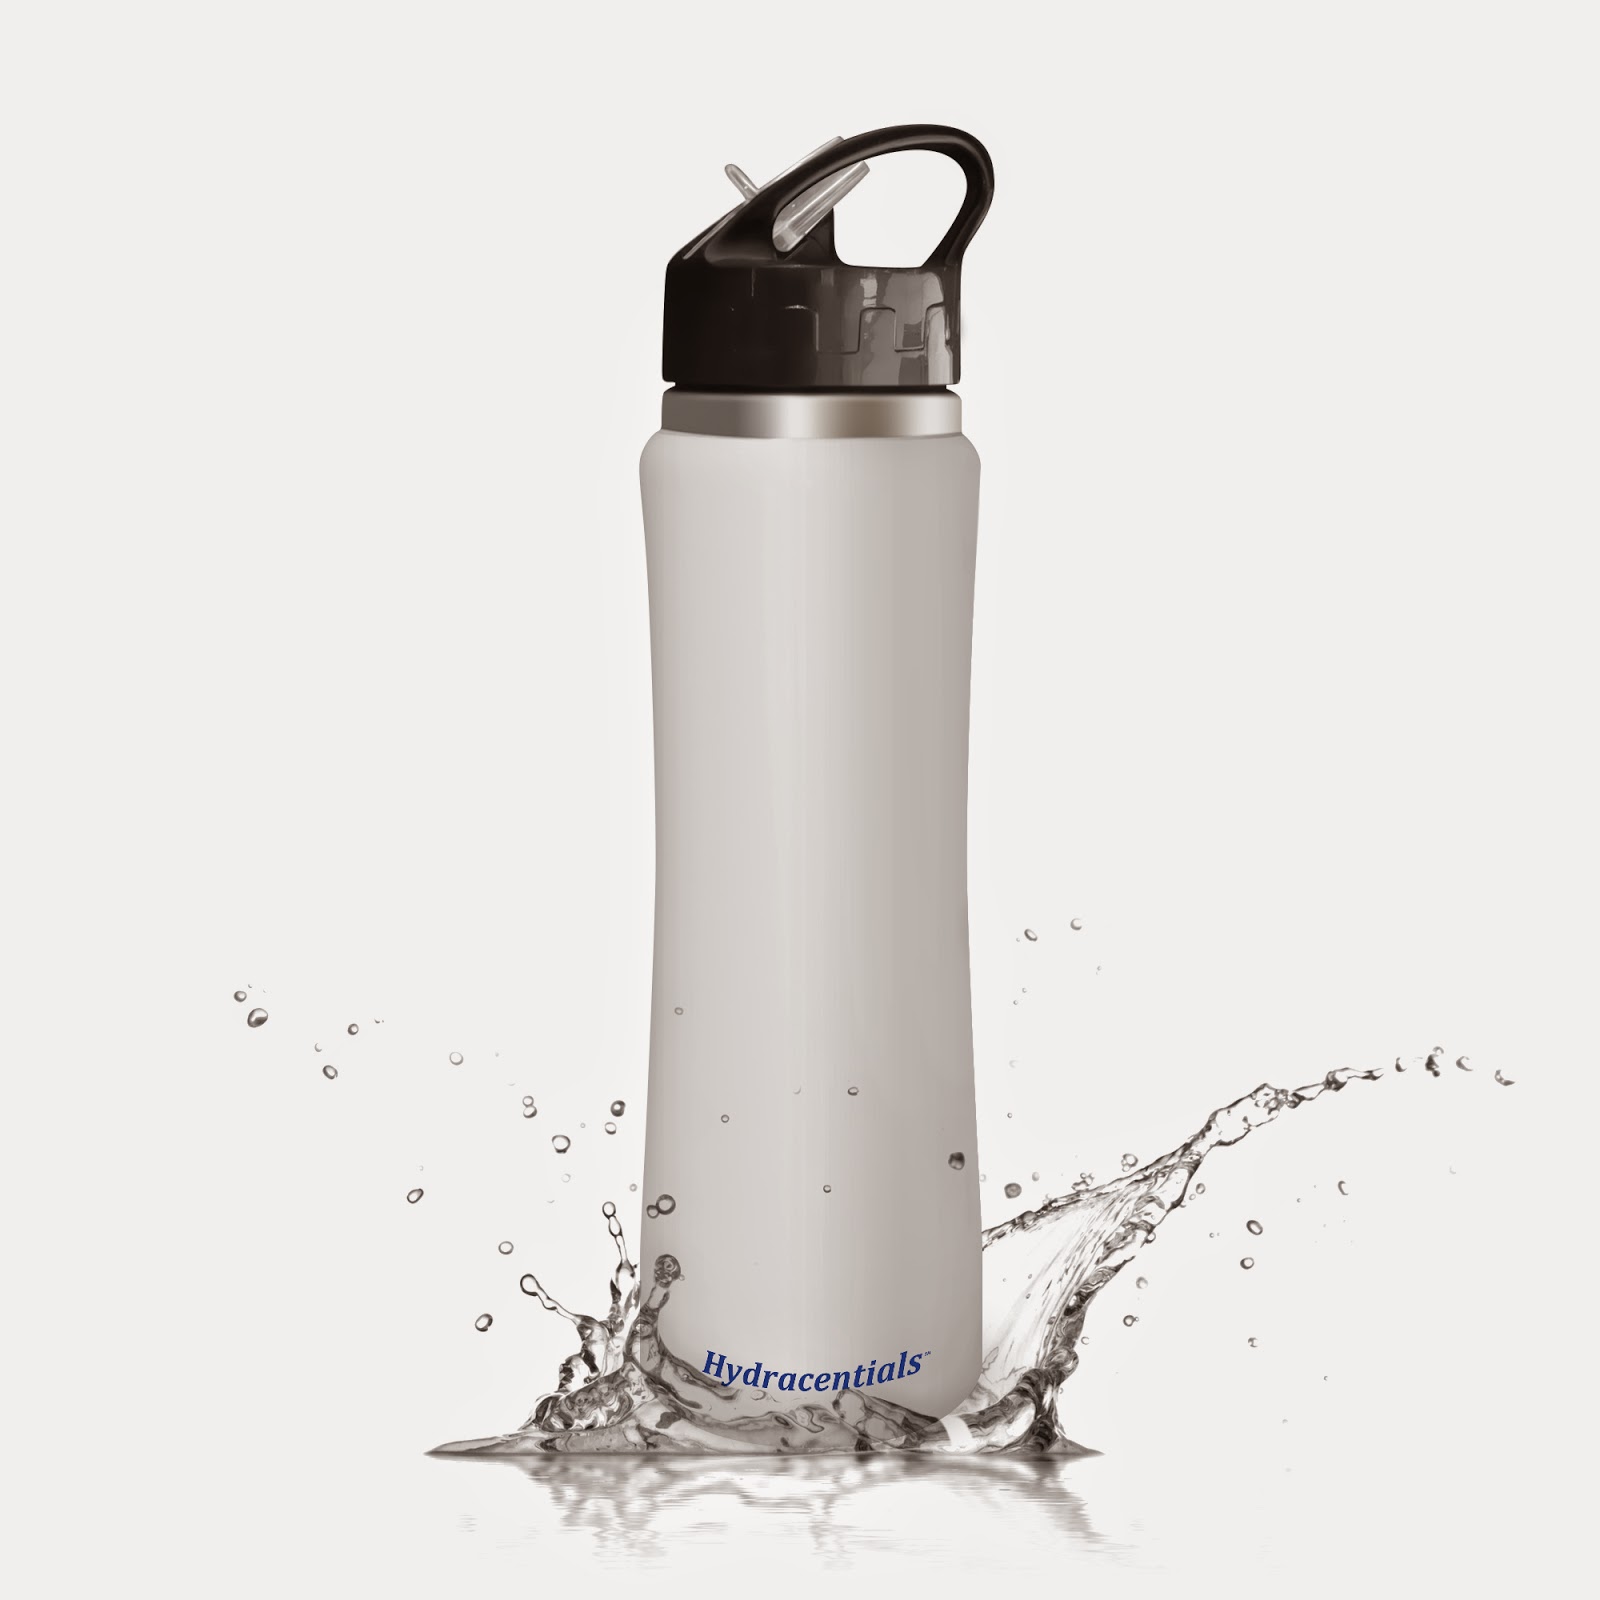 Sharingdelights Hydracentials Sporty 25 oz Double Wall Insulated Stainless Steel Water Bottle